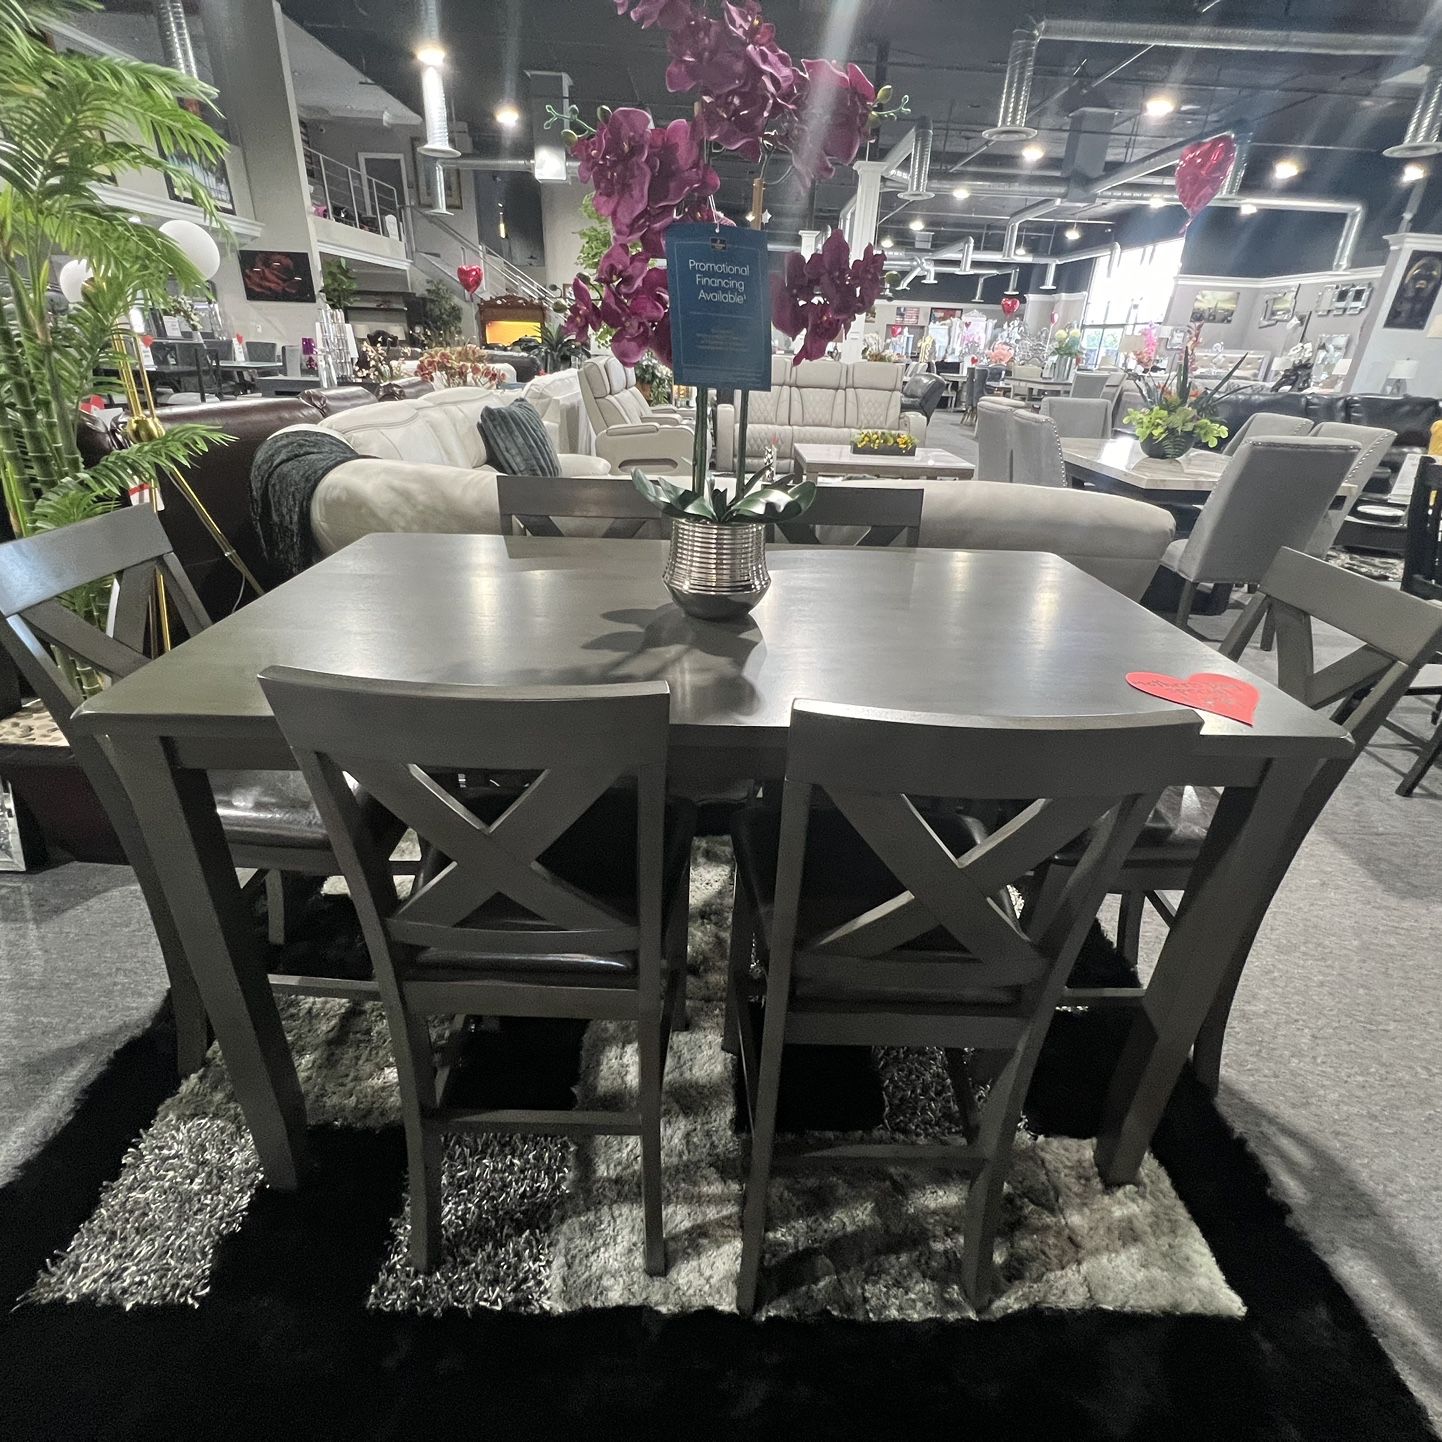 7 Pc Dining Table🎈🎈🎈